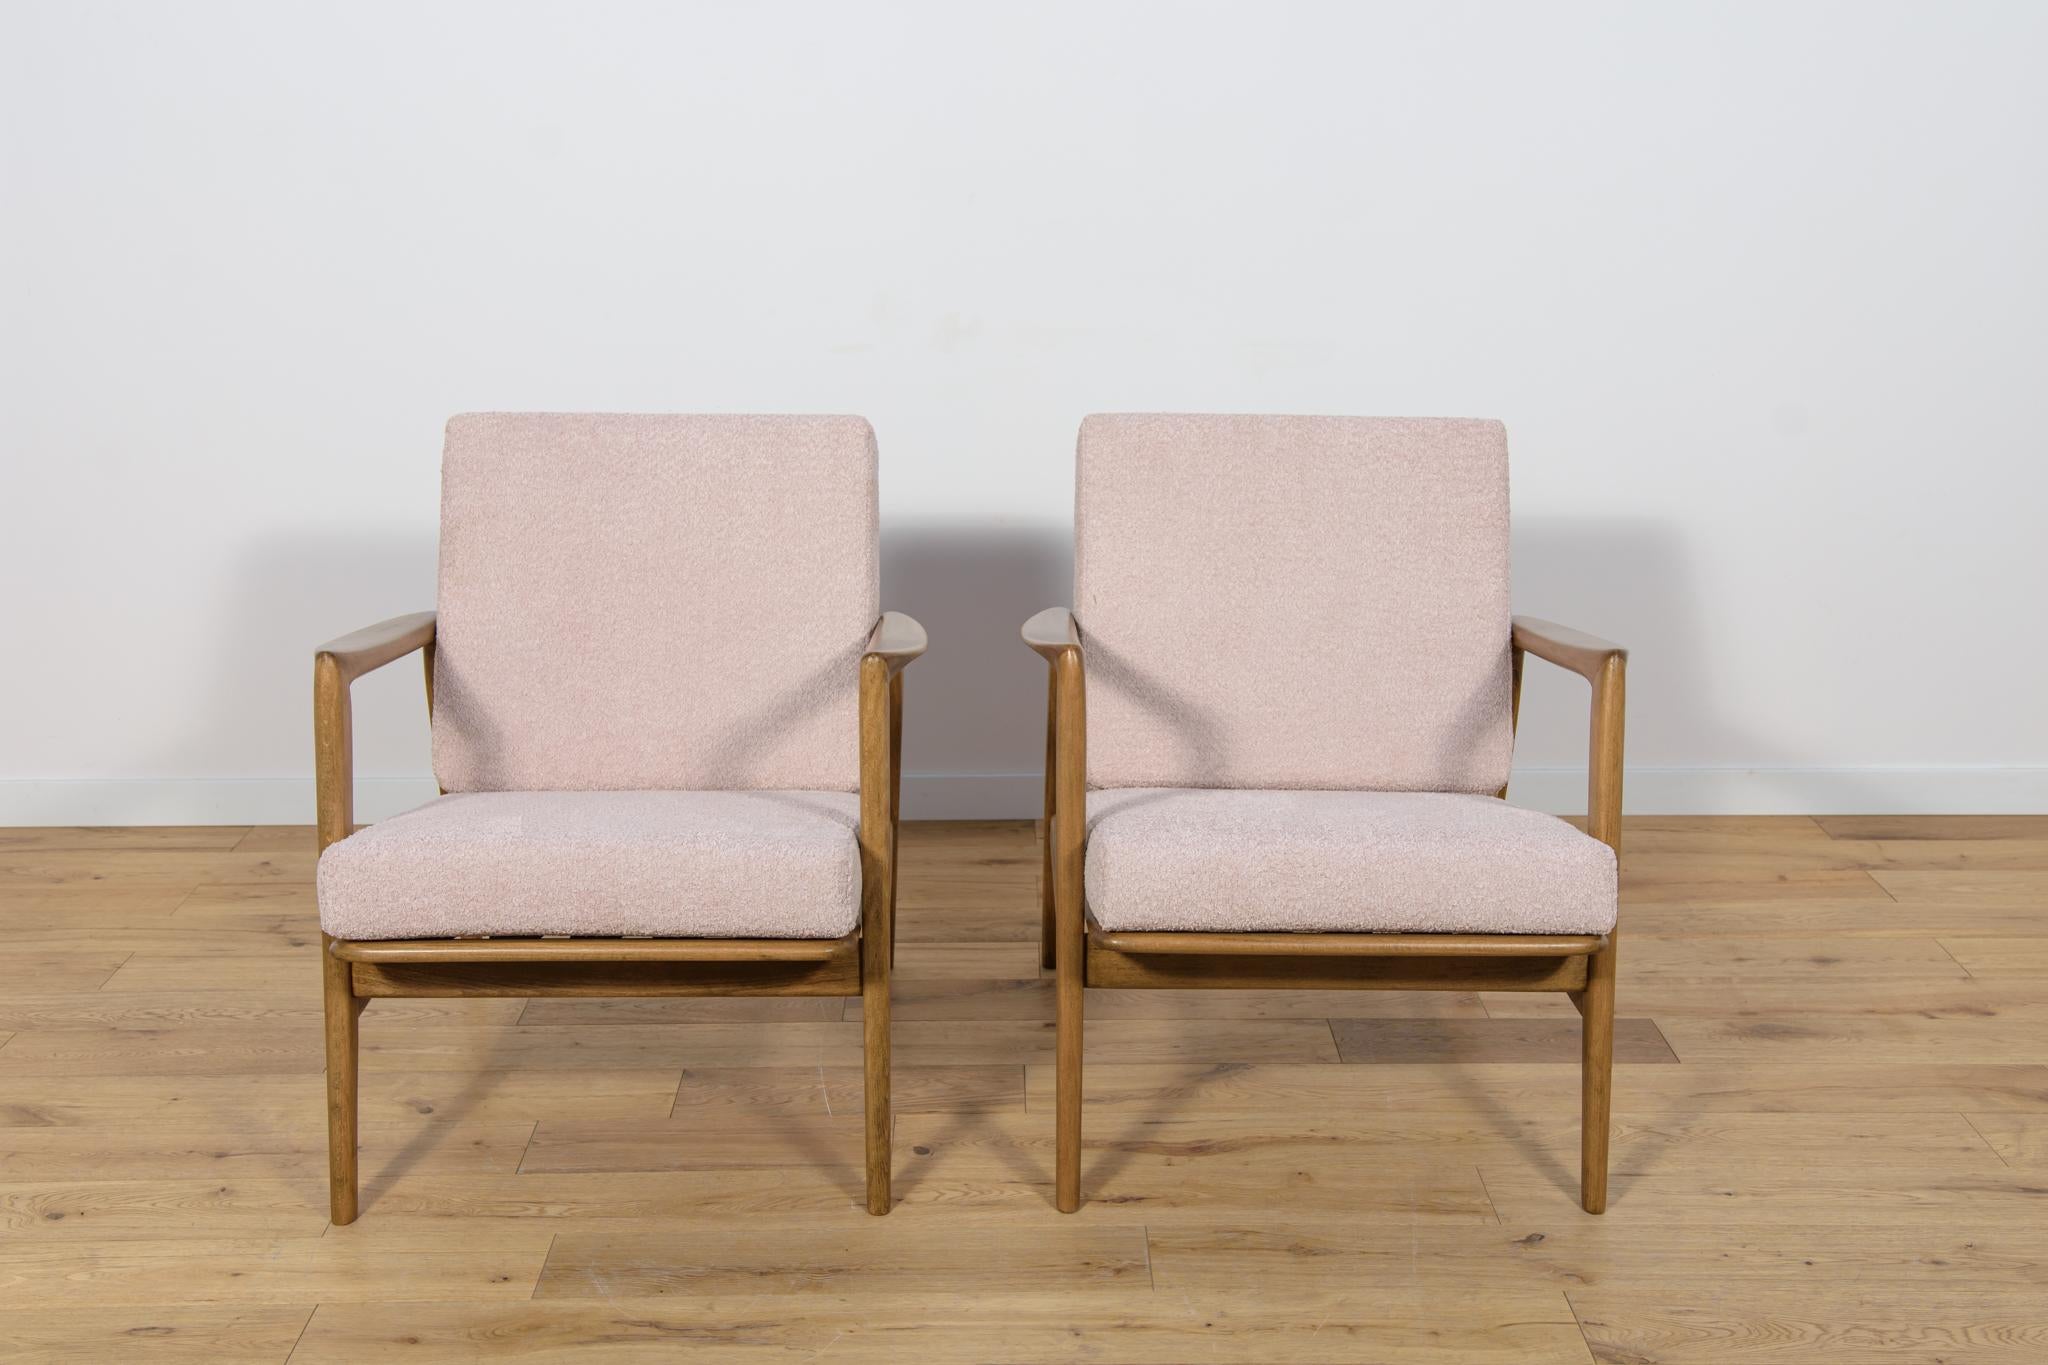 This pair of armchairs was produced by the Polish company Swarzędzka Furniture Factory in 60s. Comfortable armchairs with a unique form. Cushions replaced with new ones, upholstered in high-quality boucle typ fabric in a light pink color. The beech